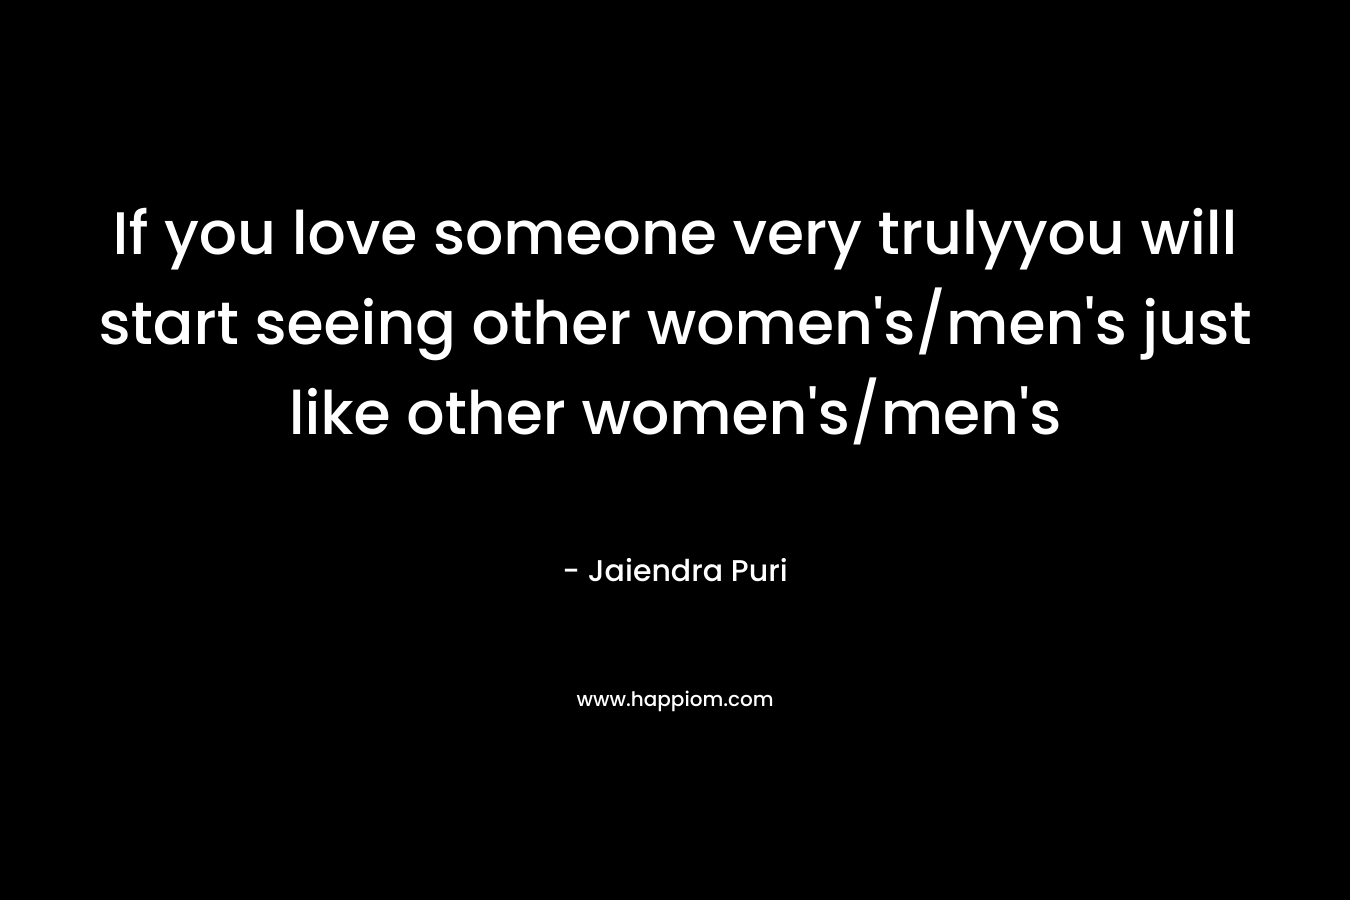 If you love someone very trulyyou will start seeing other women’s/men’s just like other women’s/men’s – Jaiendra Puri